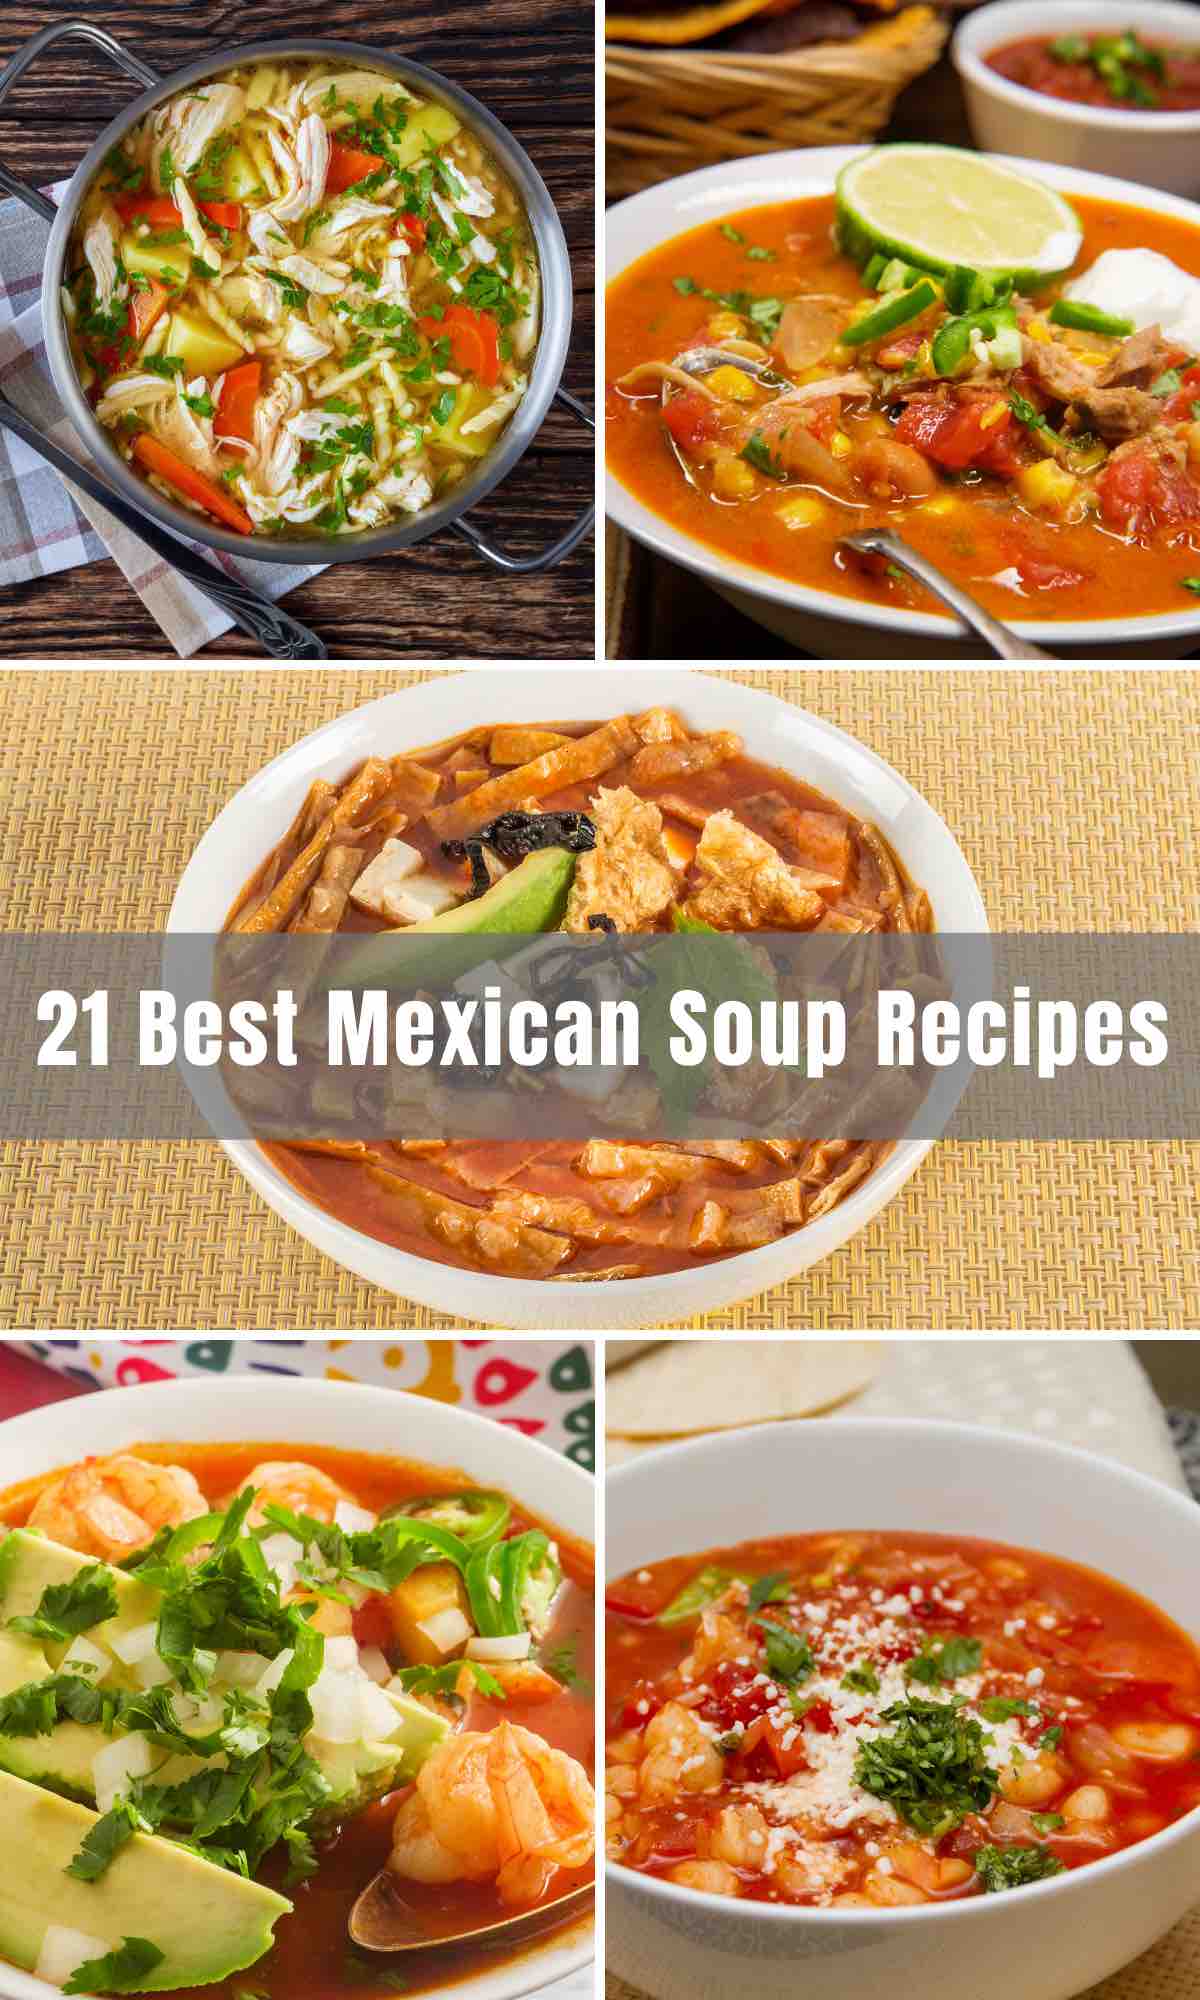 There are so many things to love about Mexican food, especially when it comes to soup. We’ve rounded up 21 Best Mexican Soup Recipes for Cinco De Mayo, your next Taco Tuesday, or a simple wholesome dinner or appetizer. From Mexican chicken soup to meatball soup, tortilla soup, and beef soup, you’ll find something that your whole family loves.